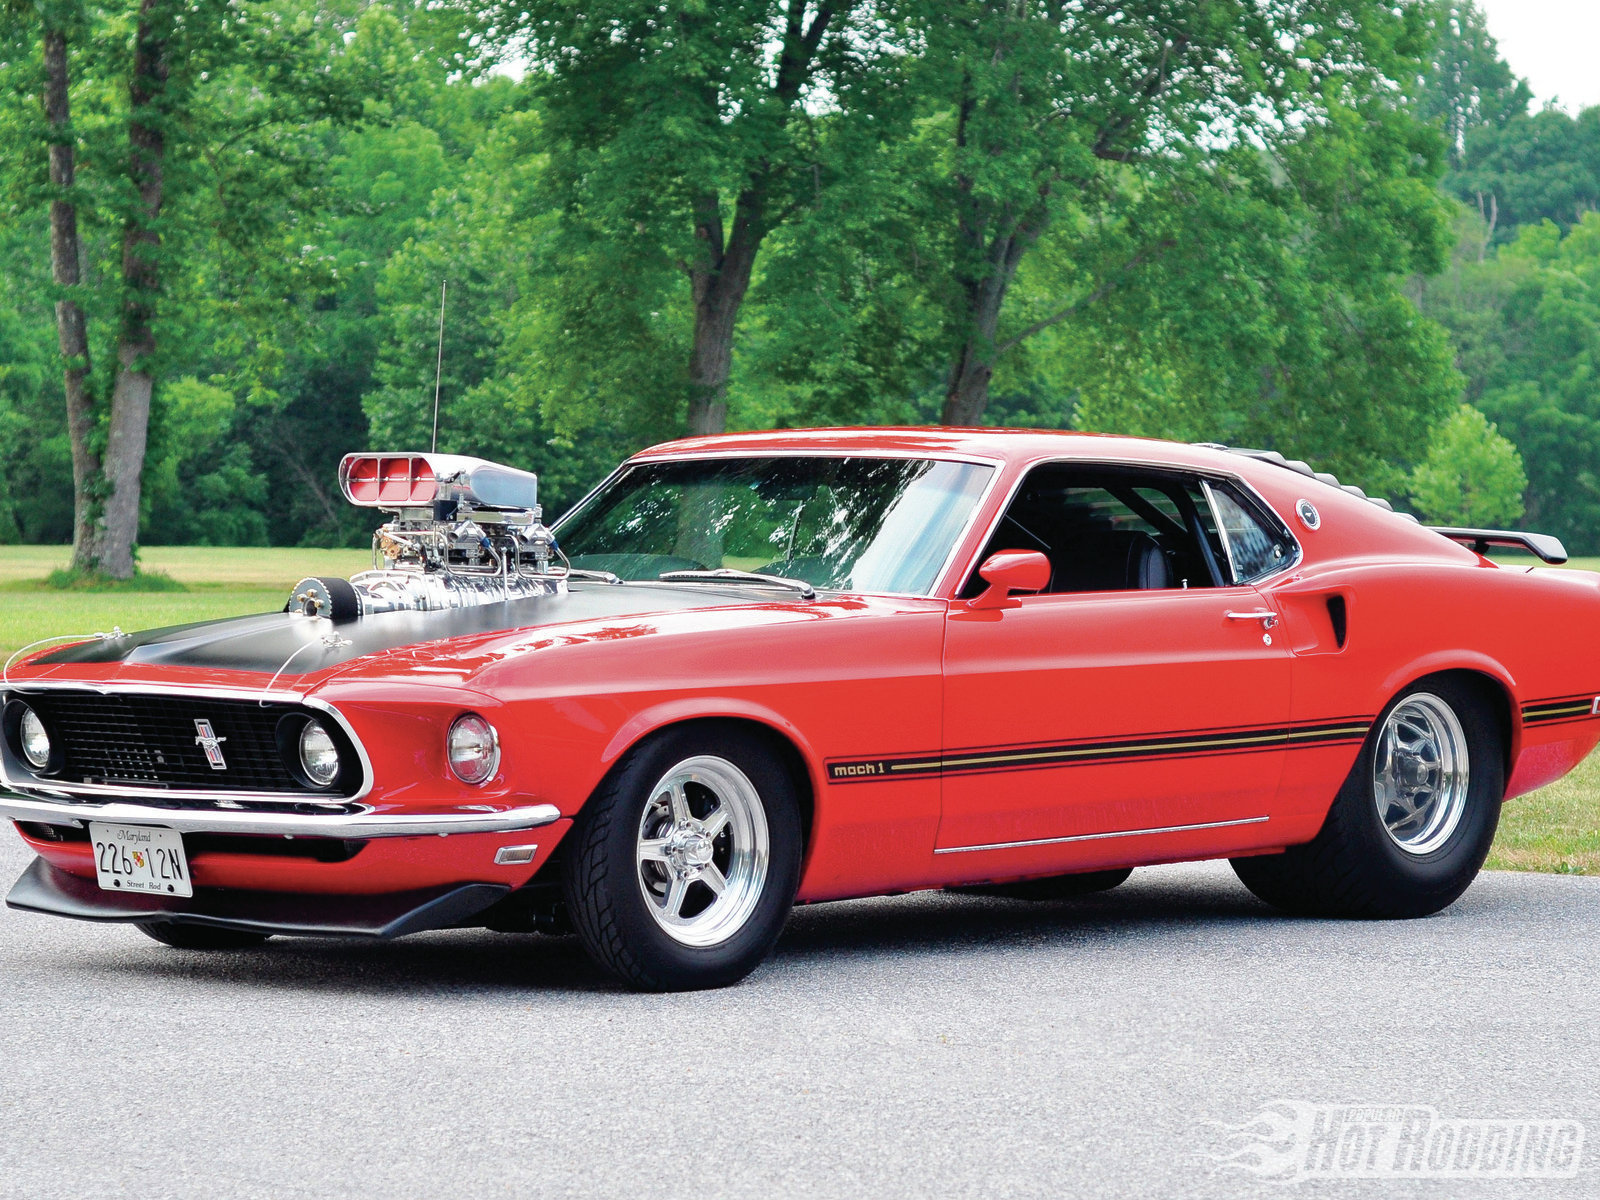 1969, Ford, Mach i, Mustang, Muscle, Cars, Hot, Rods, Drag, Racing, Red, Orange, Engine, Blower, Blown Wallpaper